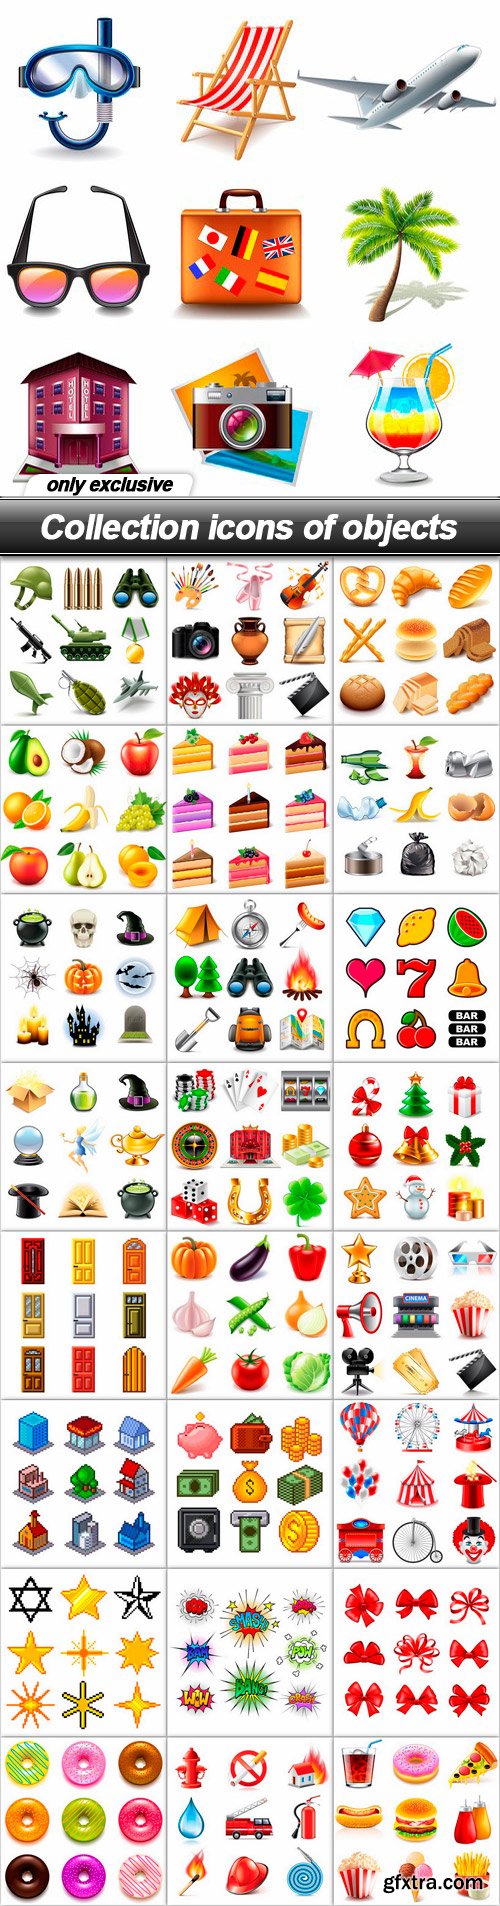 Collection icons of objects - 25 EPS